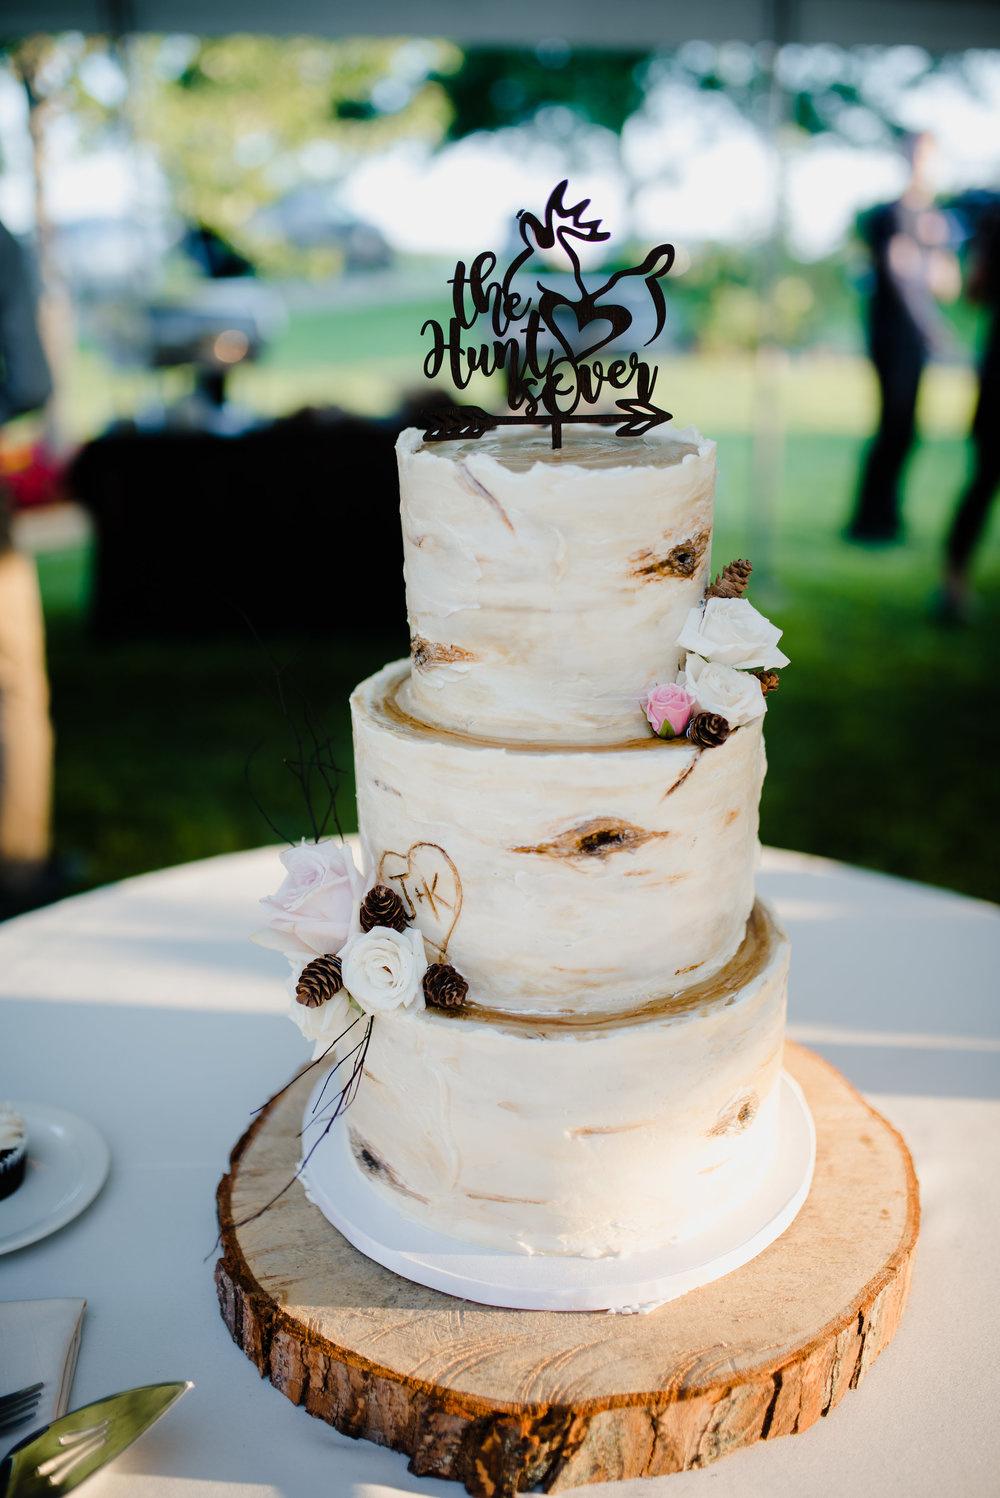 Wedding Cake Inspiration & Ideas from 25 Wedding Cakes + Tips for  Displaying Your Cake - YouTube